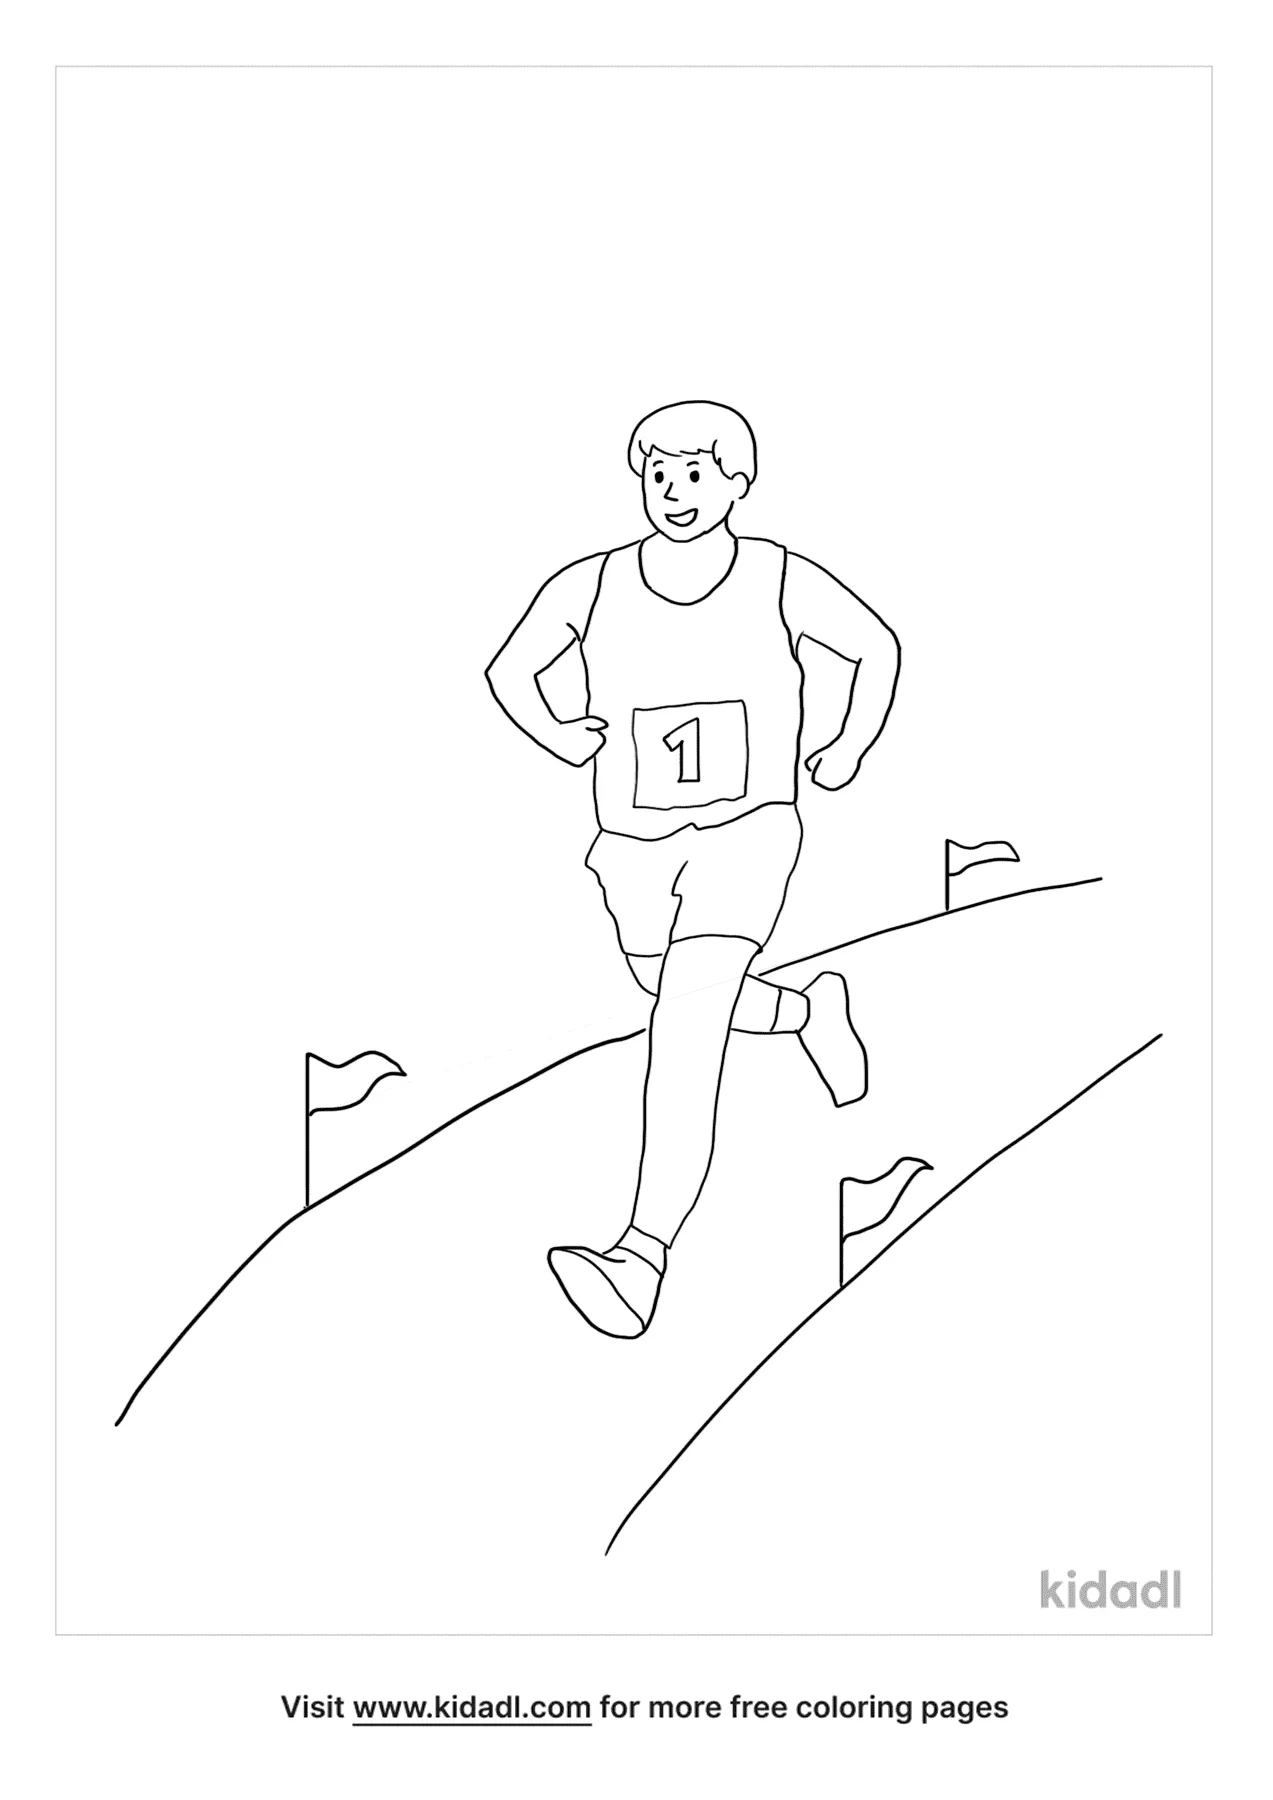 Free running track coloring page coloring page printables